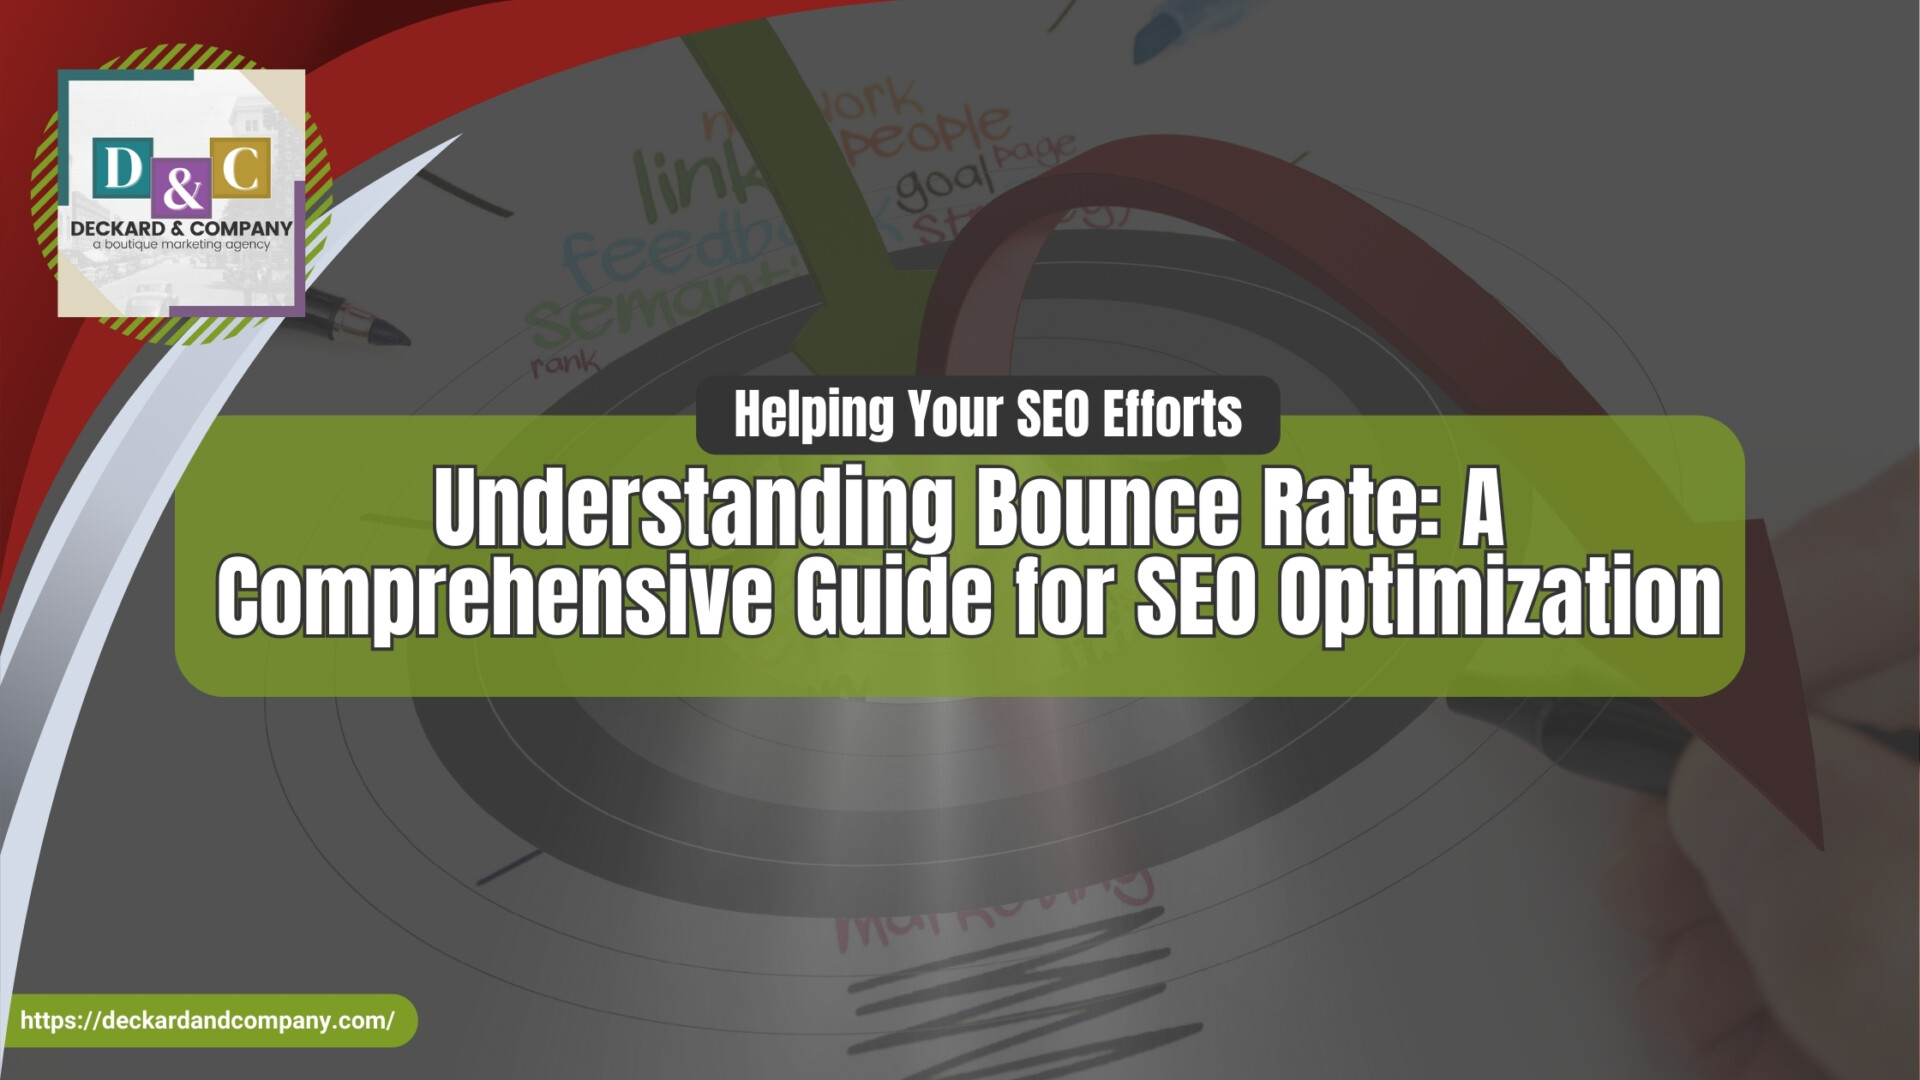 Understanding Bounce Rate A Comprehensive Guide for SEO Optimization with Deckard & Company a Bradenton SEO Company